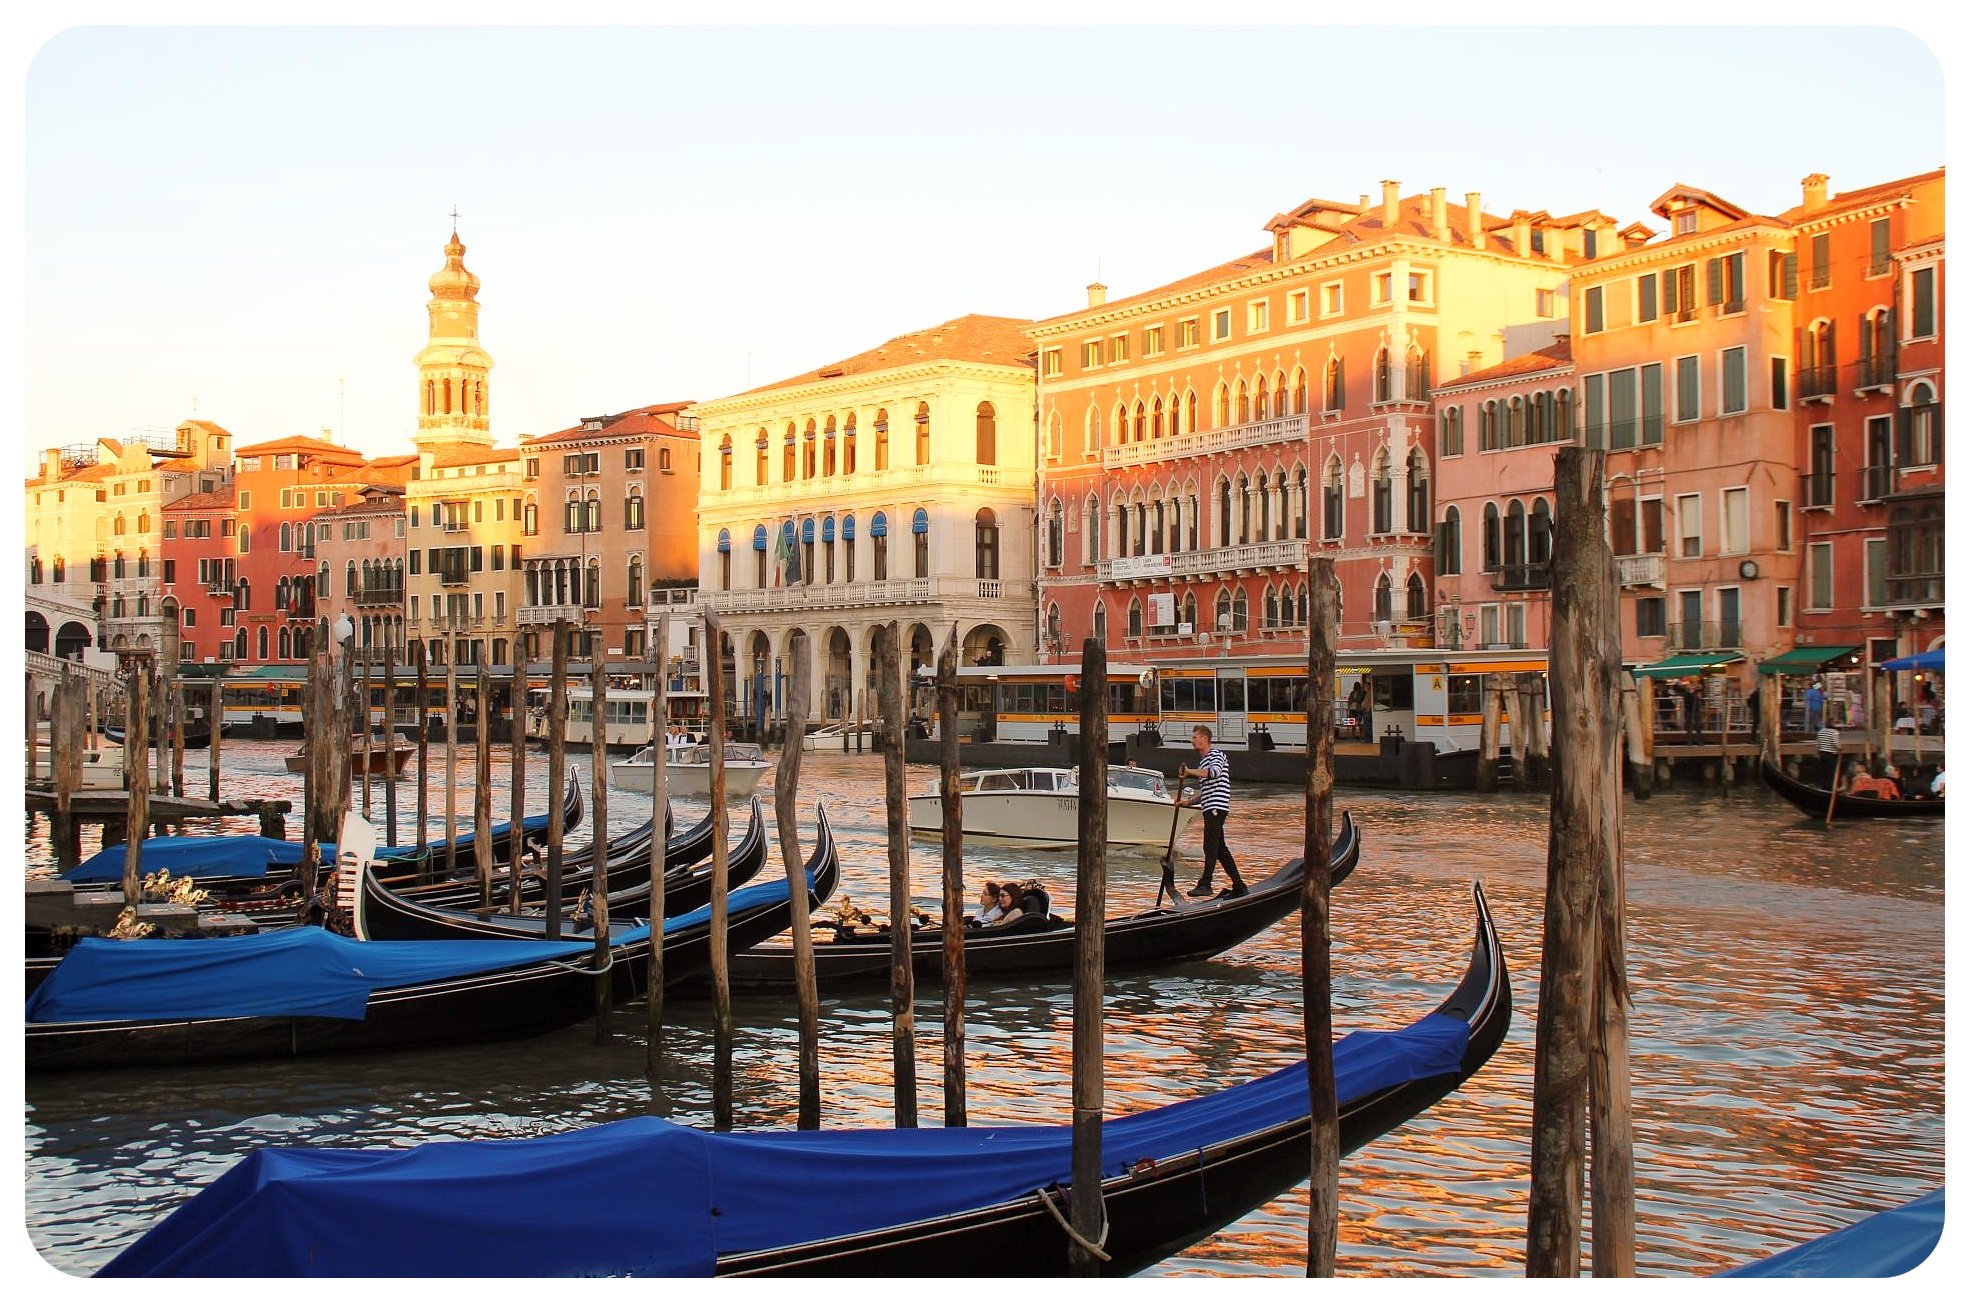 My top five travel tips for Venice, Italy